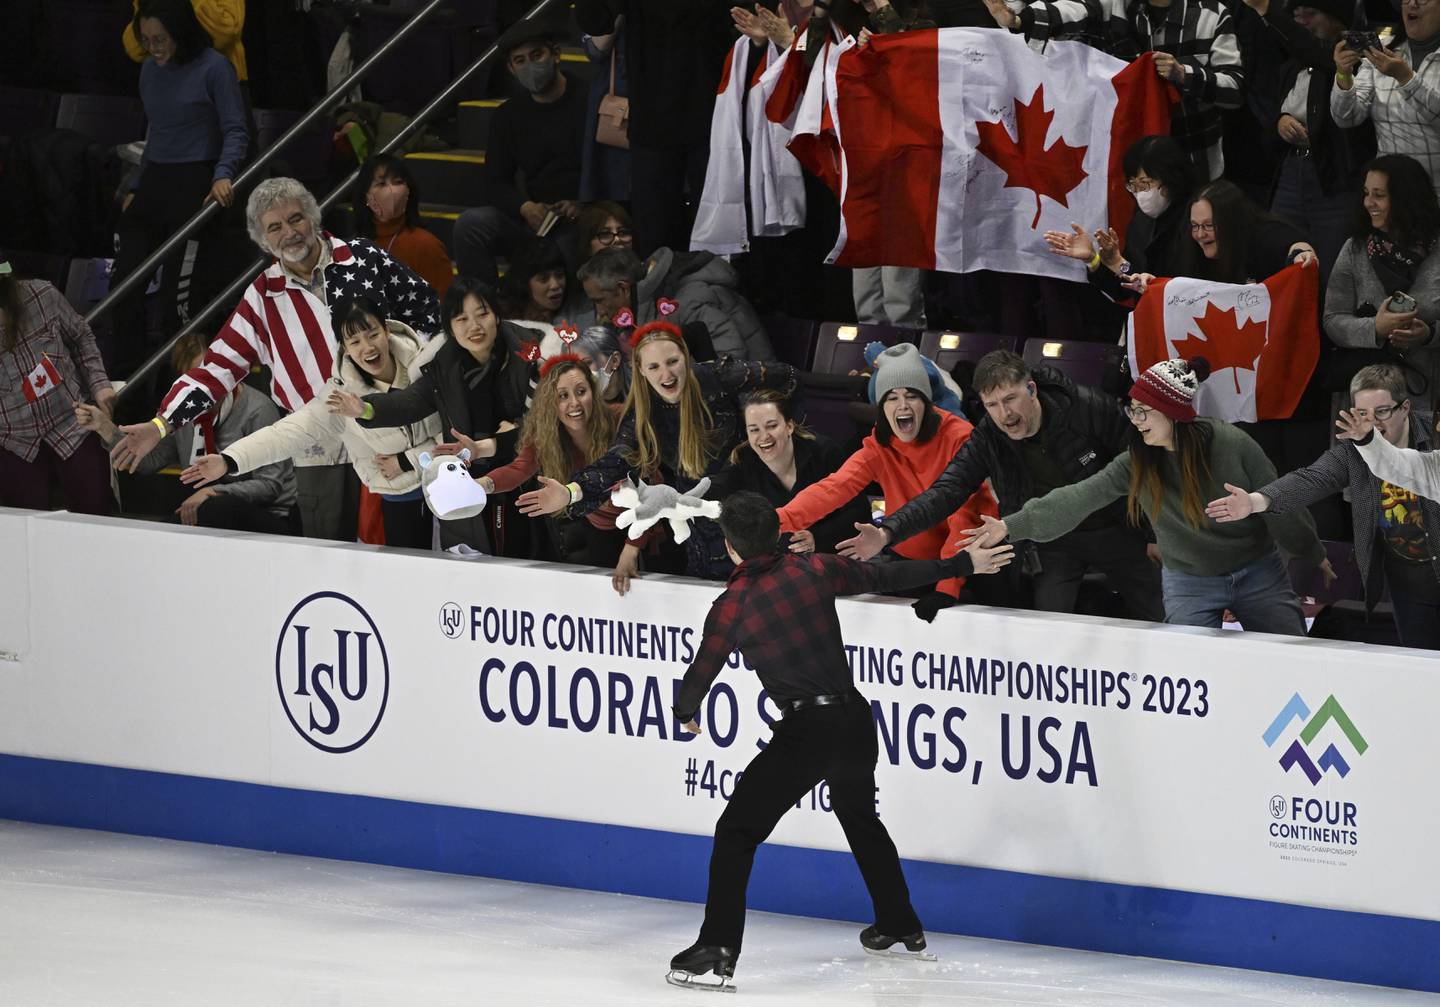 Figure skating from four continents